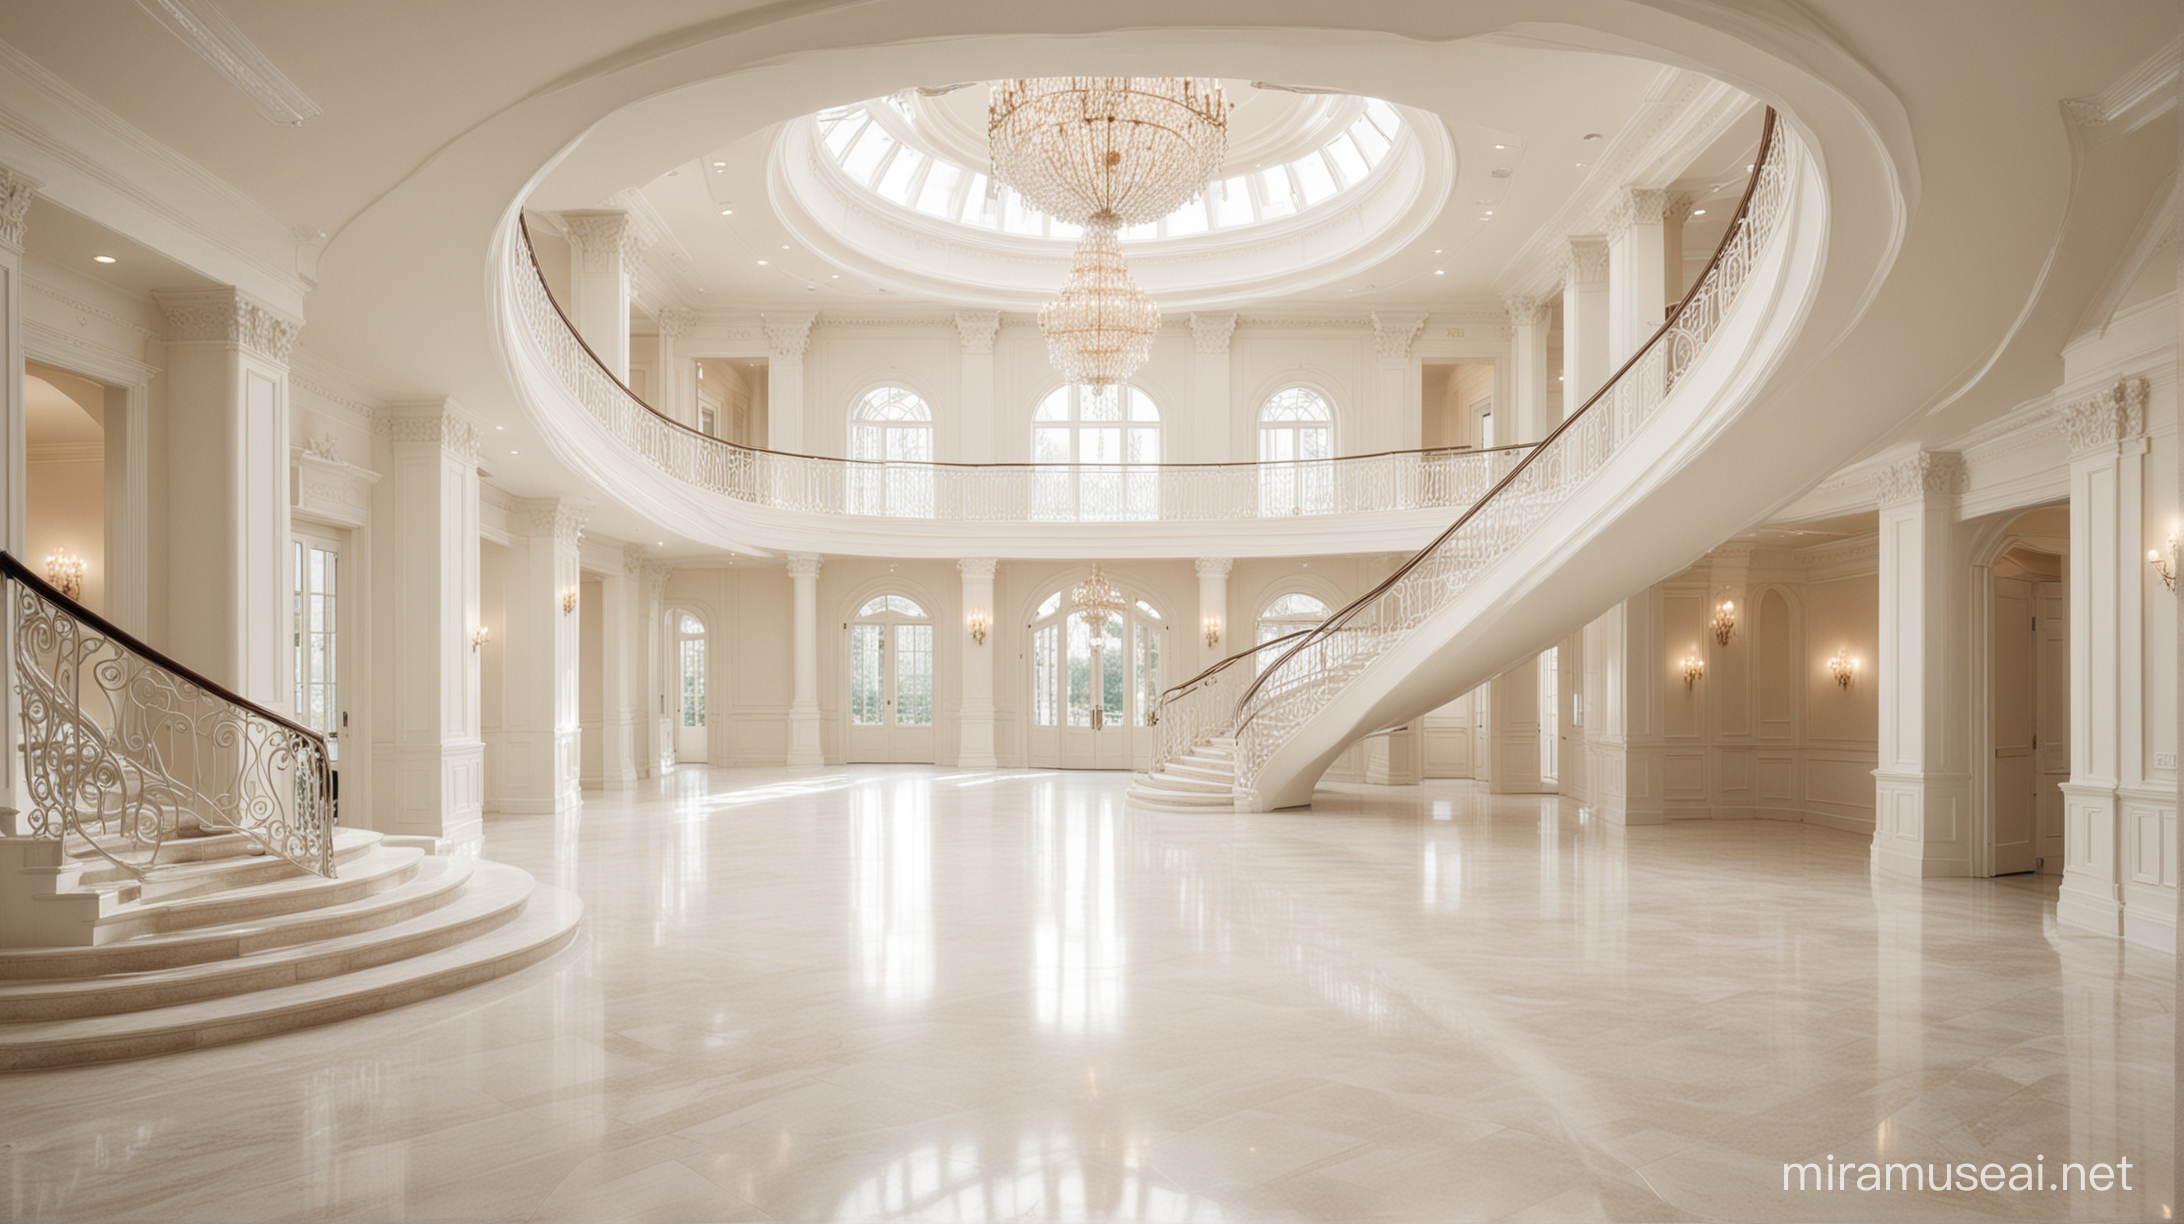 Create an image of an elegant brightly lit ballroom atrium space. The space is shades of white. And there's a curving staircase off center, on the right, with the entry to the stairs straight on, and the curve is going counterclockwise up towards the left side of the image.